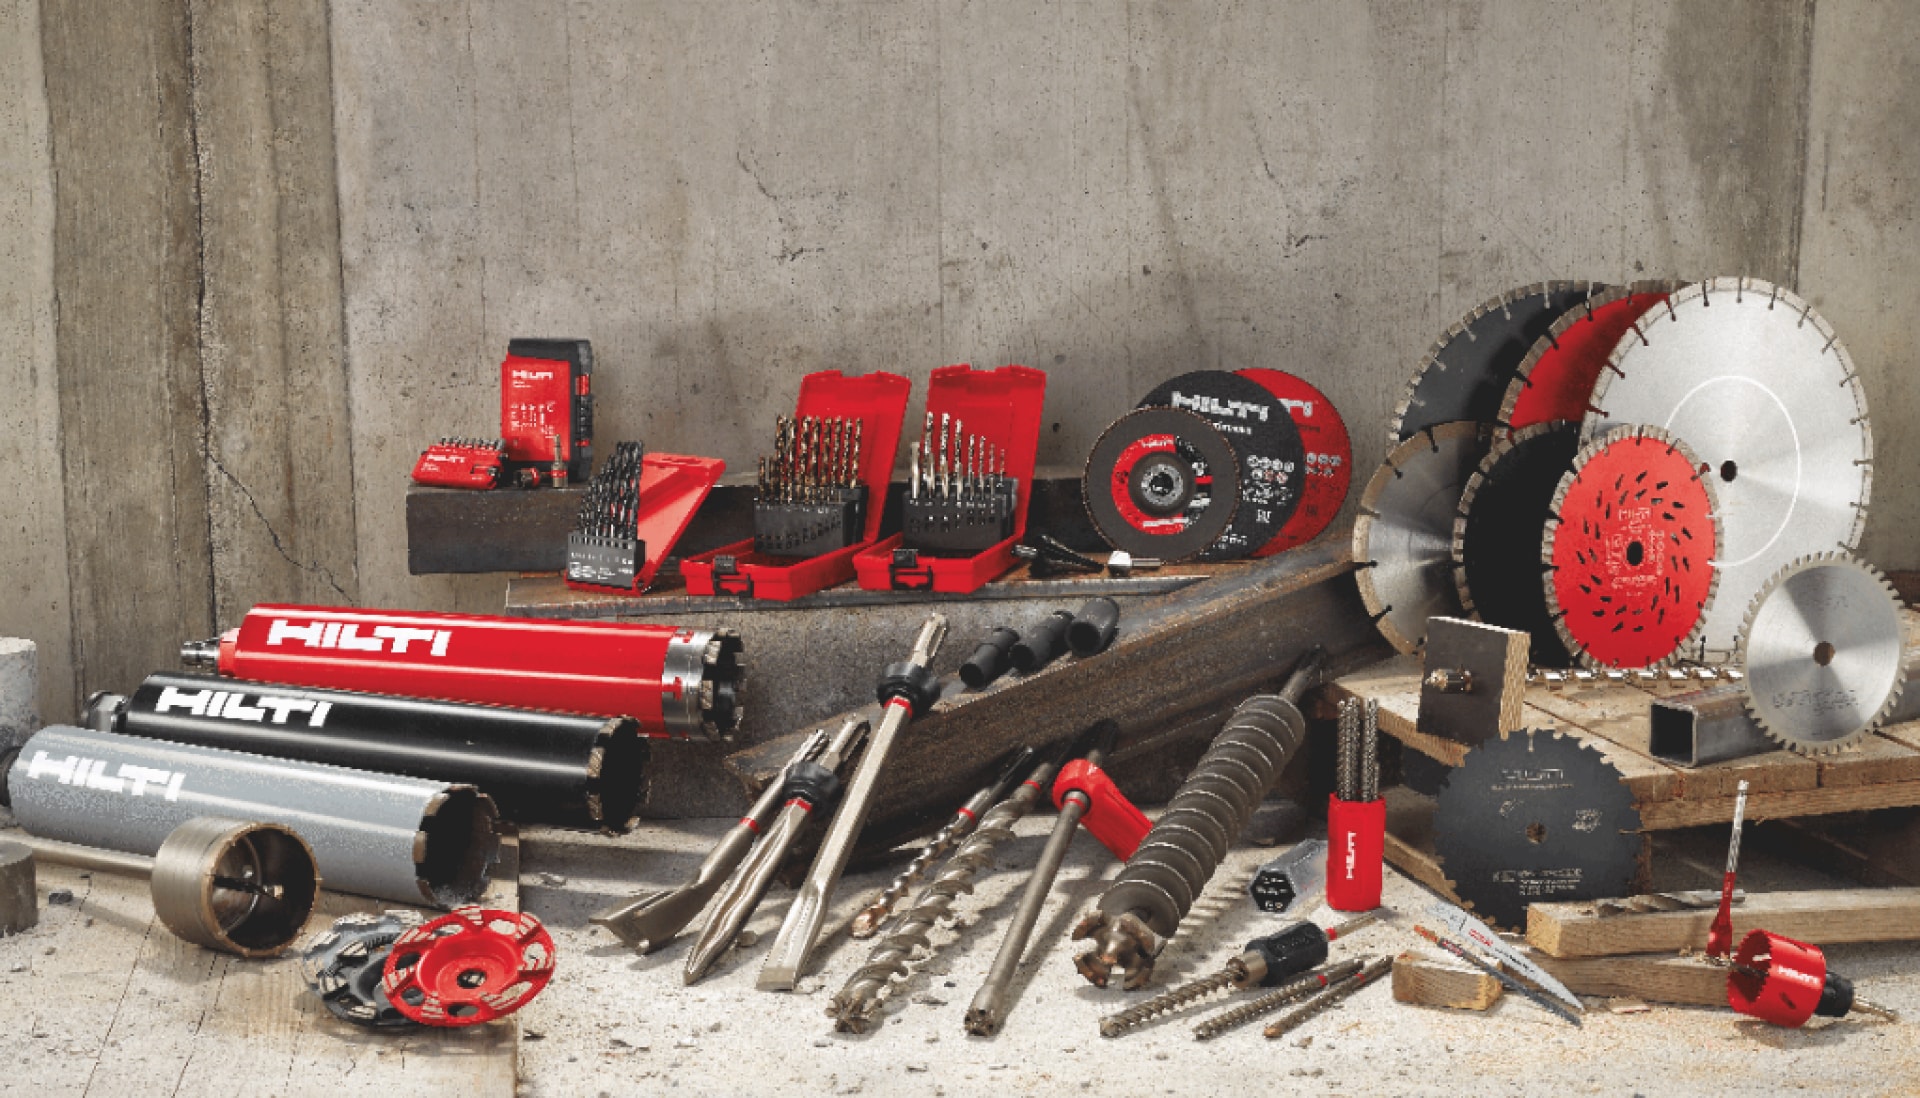 Hilti offers consumables customized for your application and budget